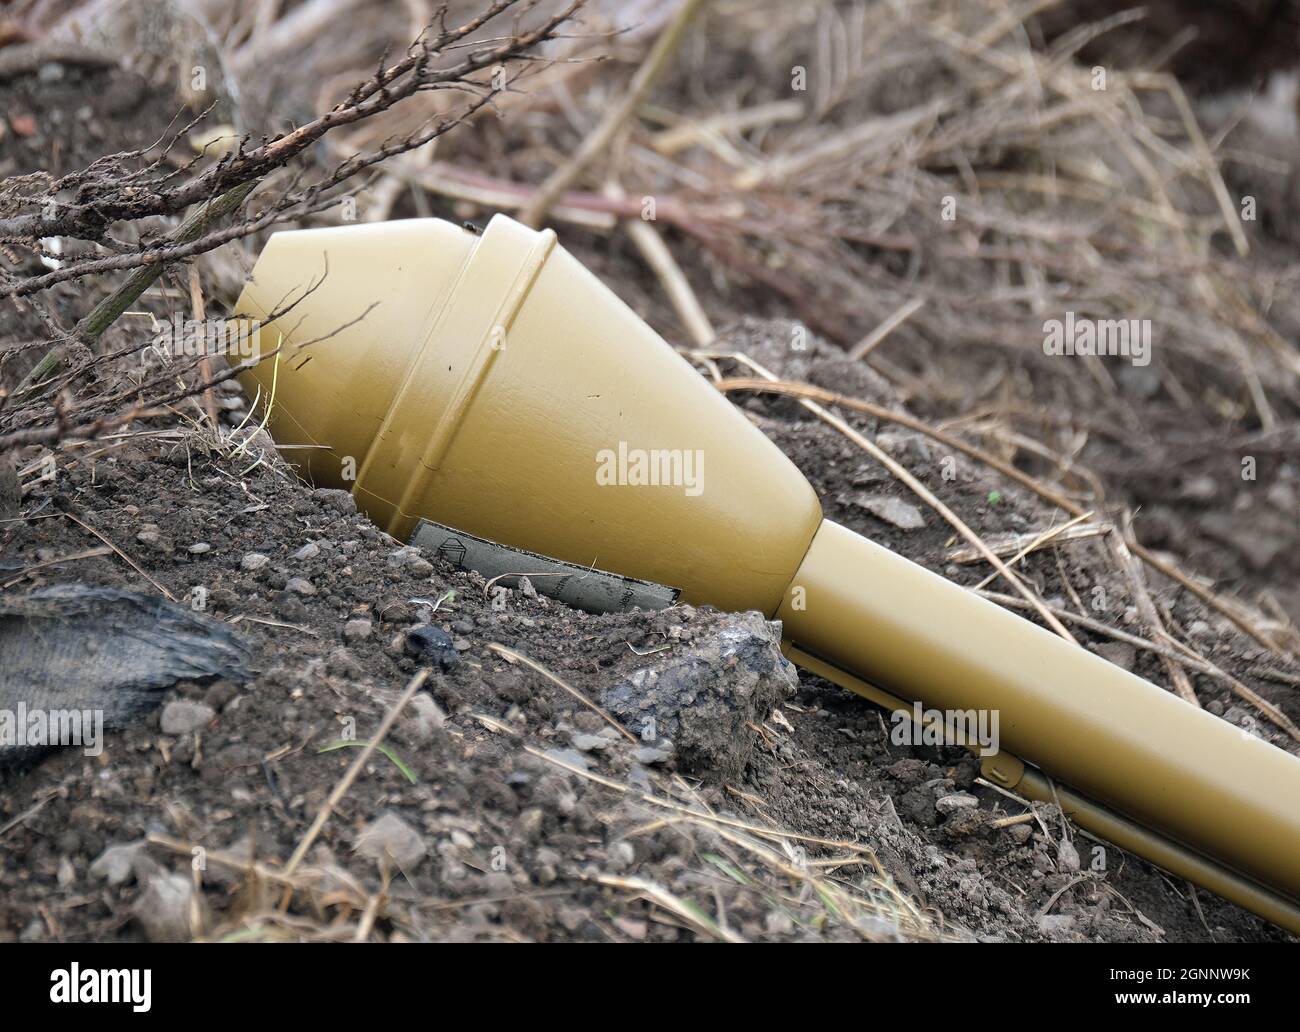 The Panzerfaust was an inexpensive, single shot, recoilless German anti-tank weapon of World War II. Shaped explosive charge. Stock Photo